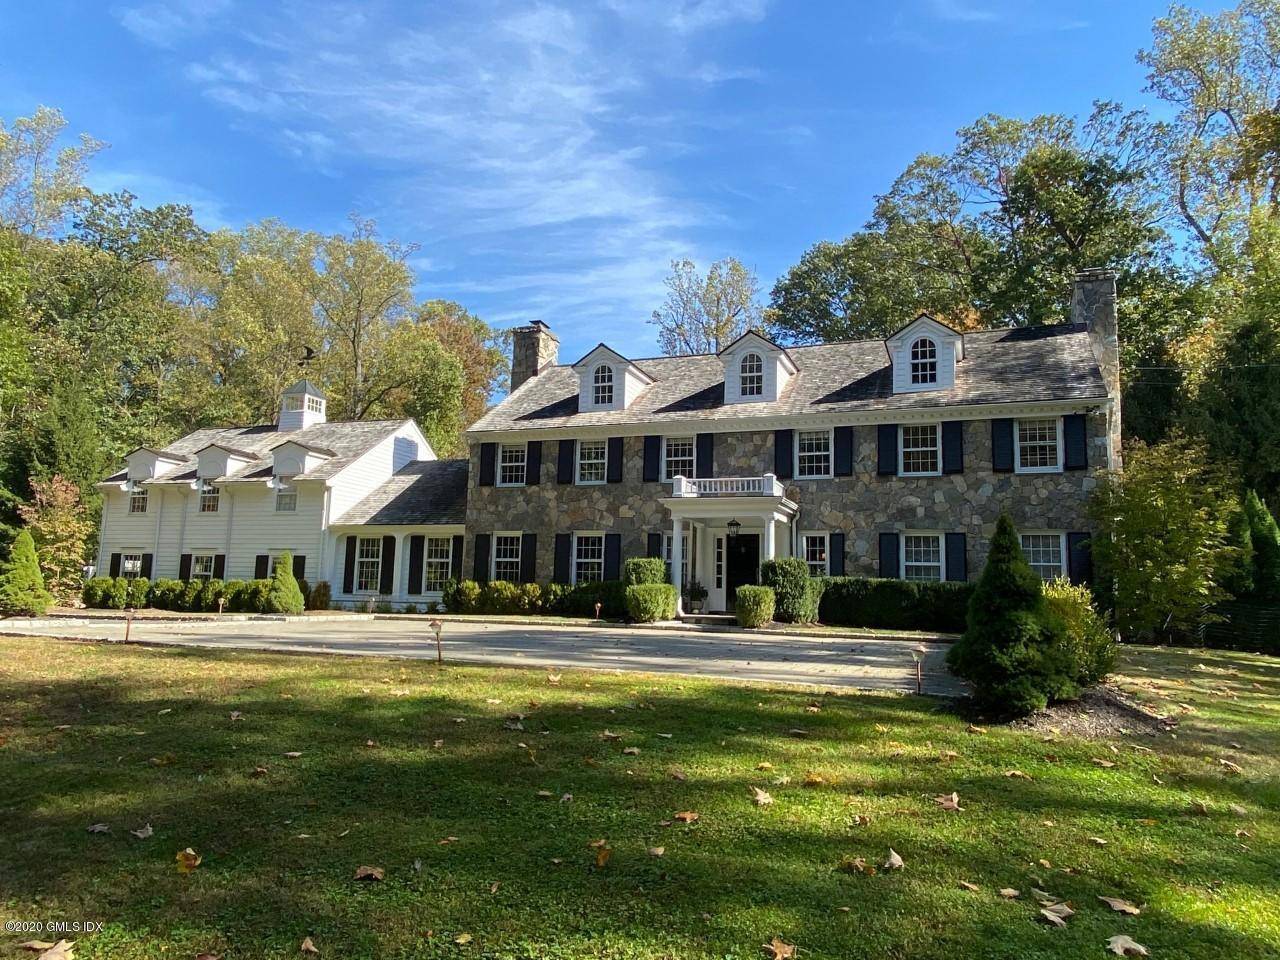 Handsome stone and clapboard colonial in a quiet private setting at the end of a cul de sac in mid country with heated pool and expansive backyard.